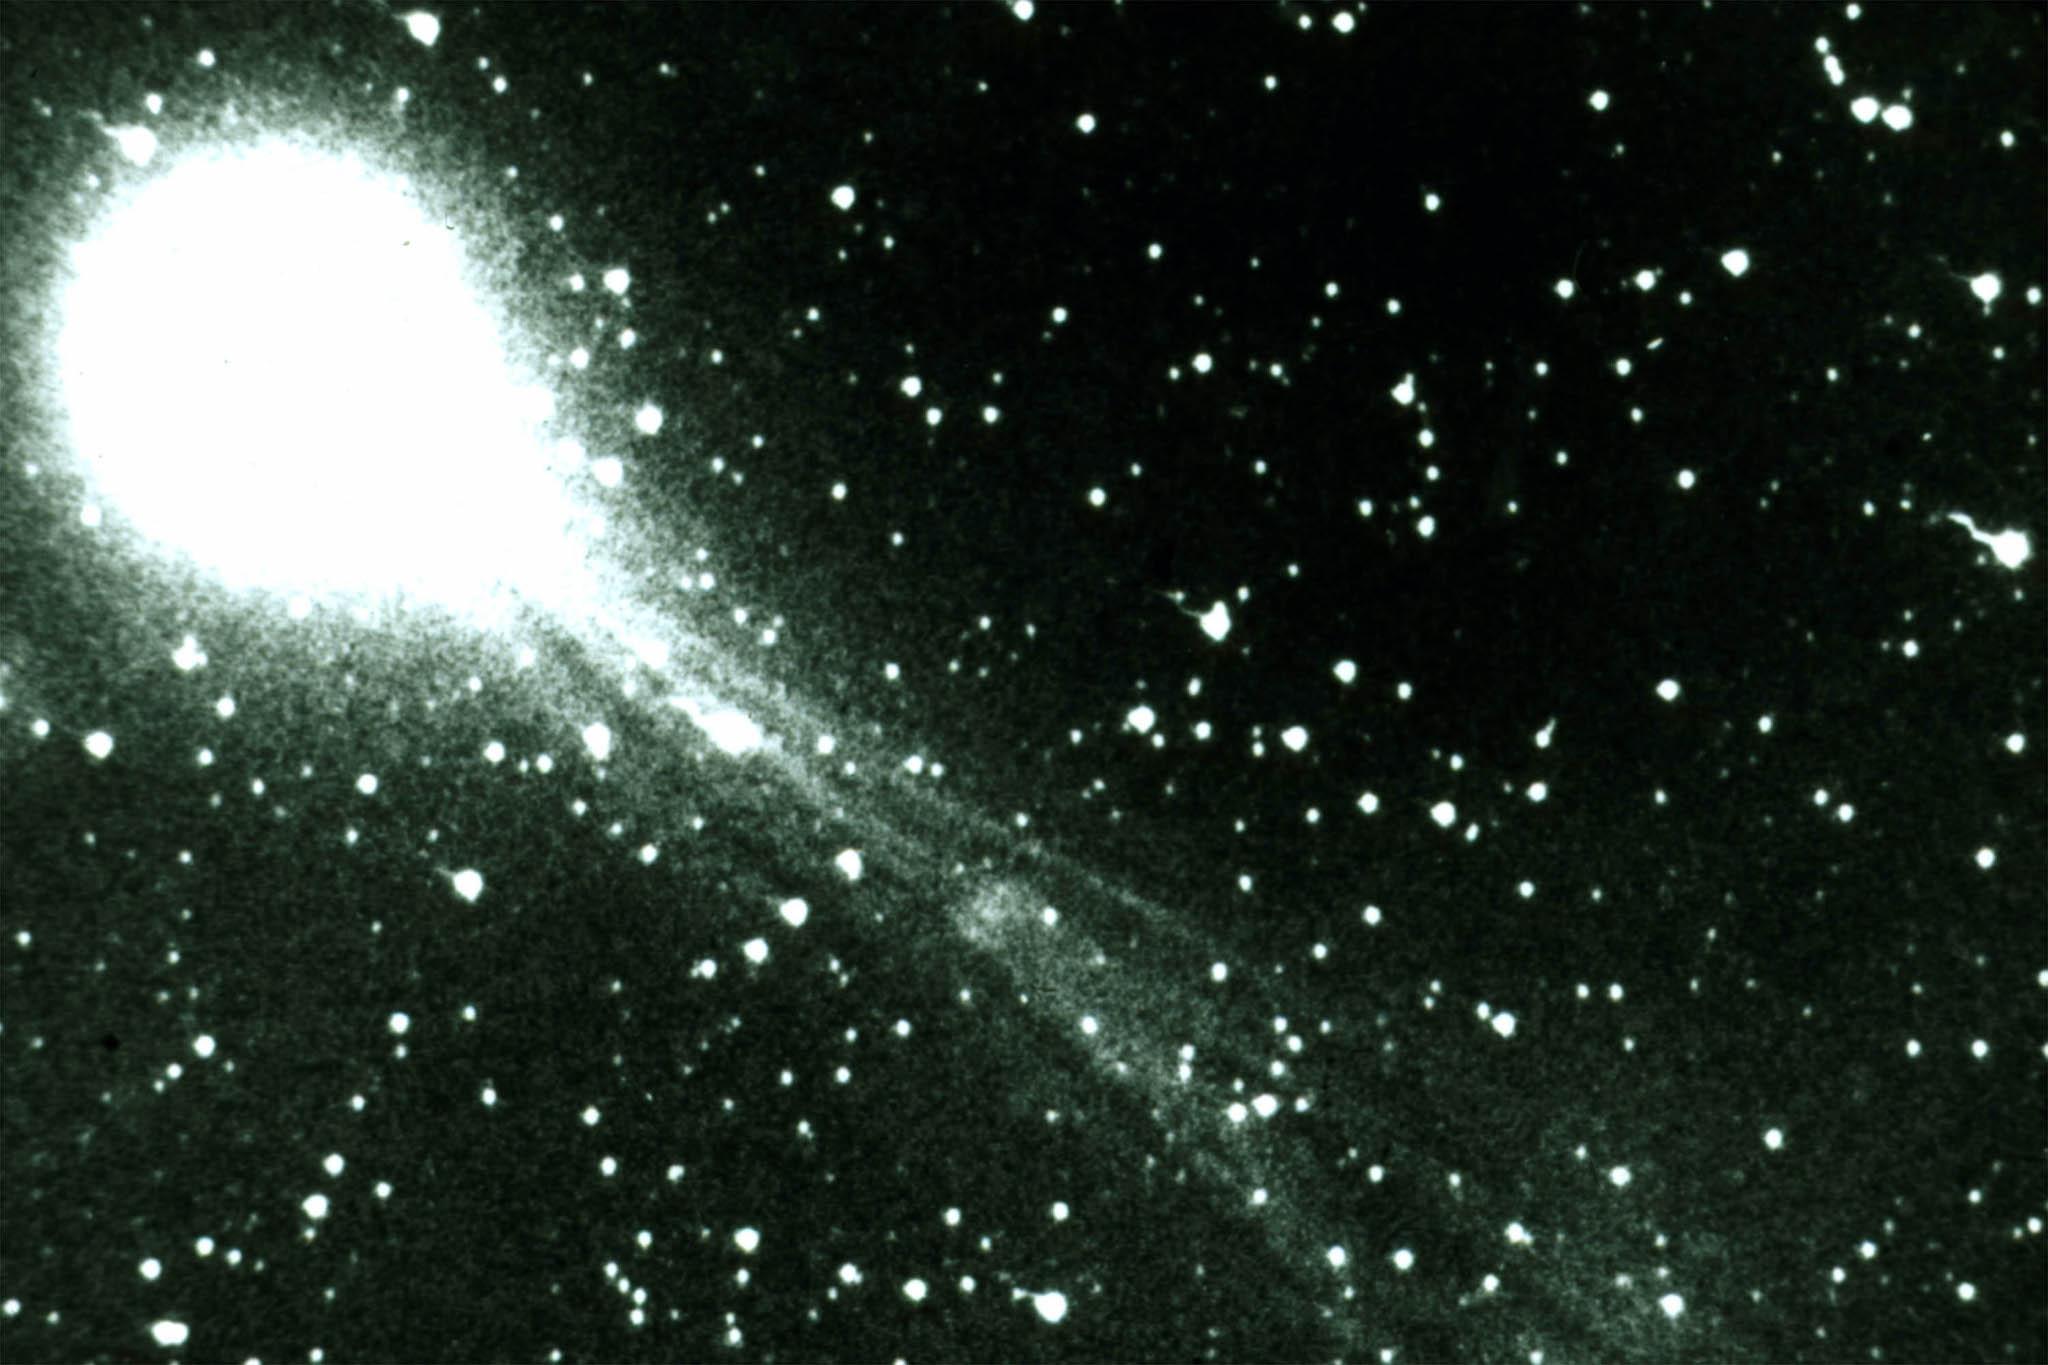 Comet Swan Nasa and ESA spot comet flying towards Earth that could be visible with naked eye The Independent The Independent pic